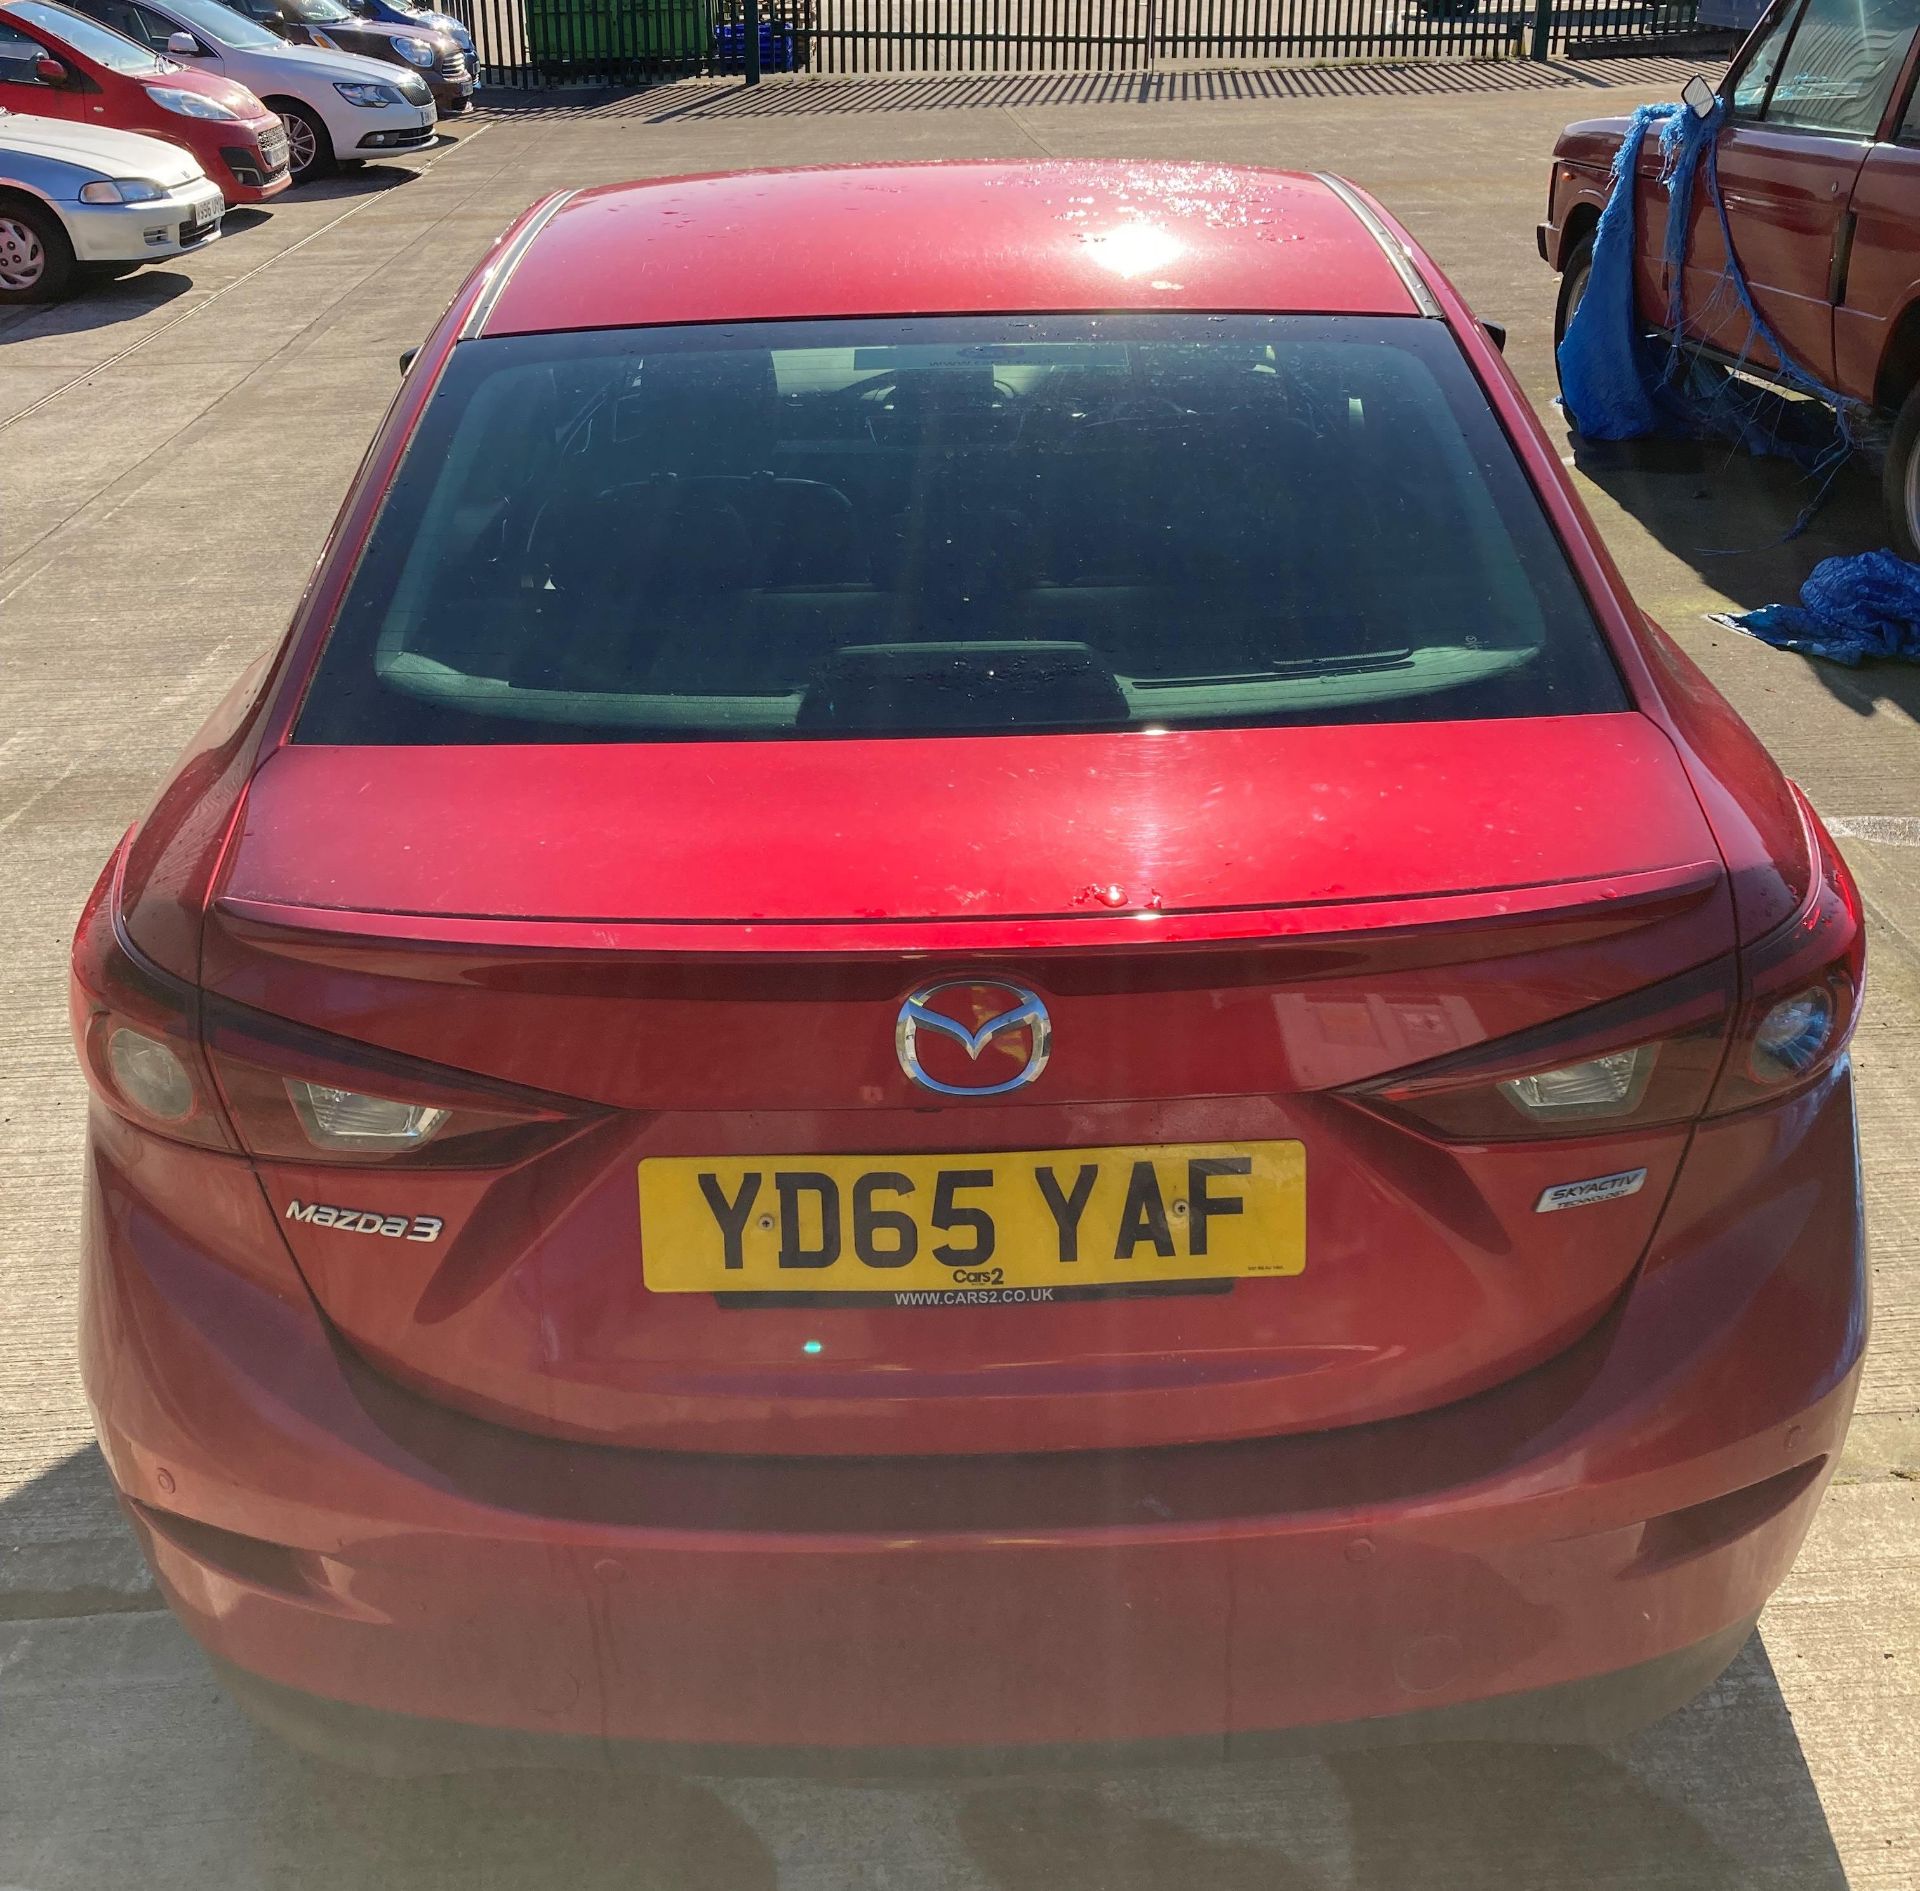 MAZDA 3 SPORT NAV 2.0 four door saloon - petrol - red with black leather interior. - Image 23 of 27